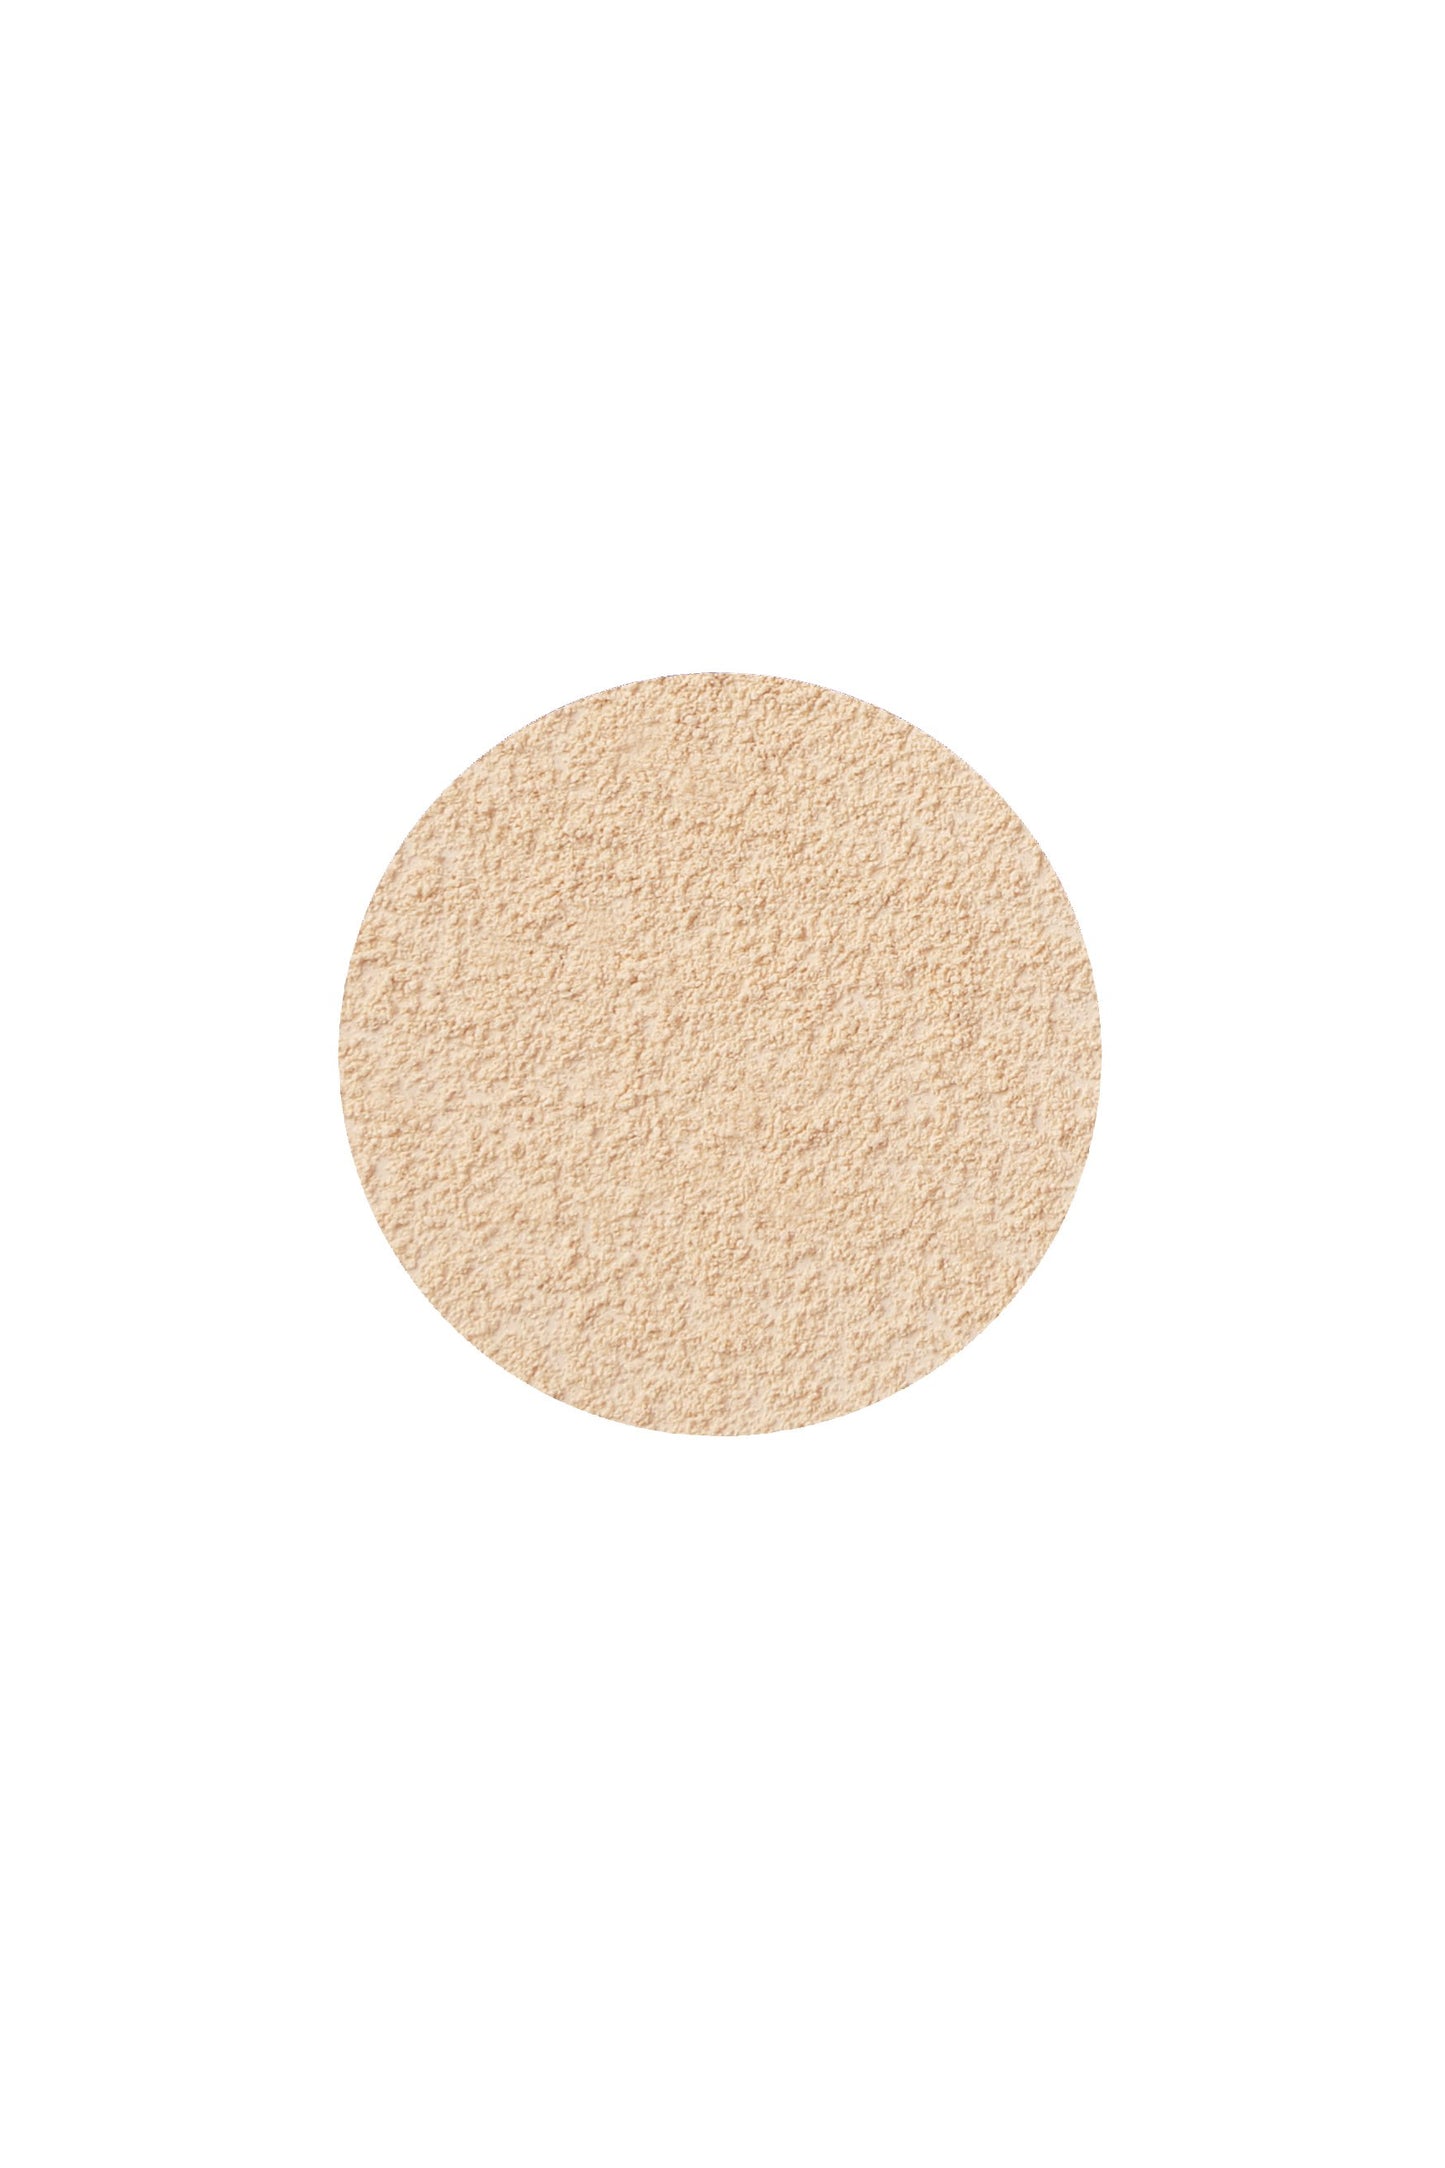  GOLD PEARL Loose Powder  (Large Refill Only) Provides a natural complexion with a glowing